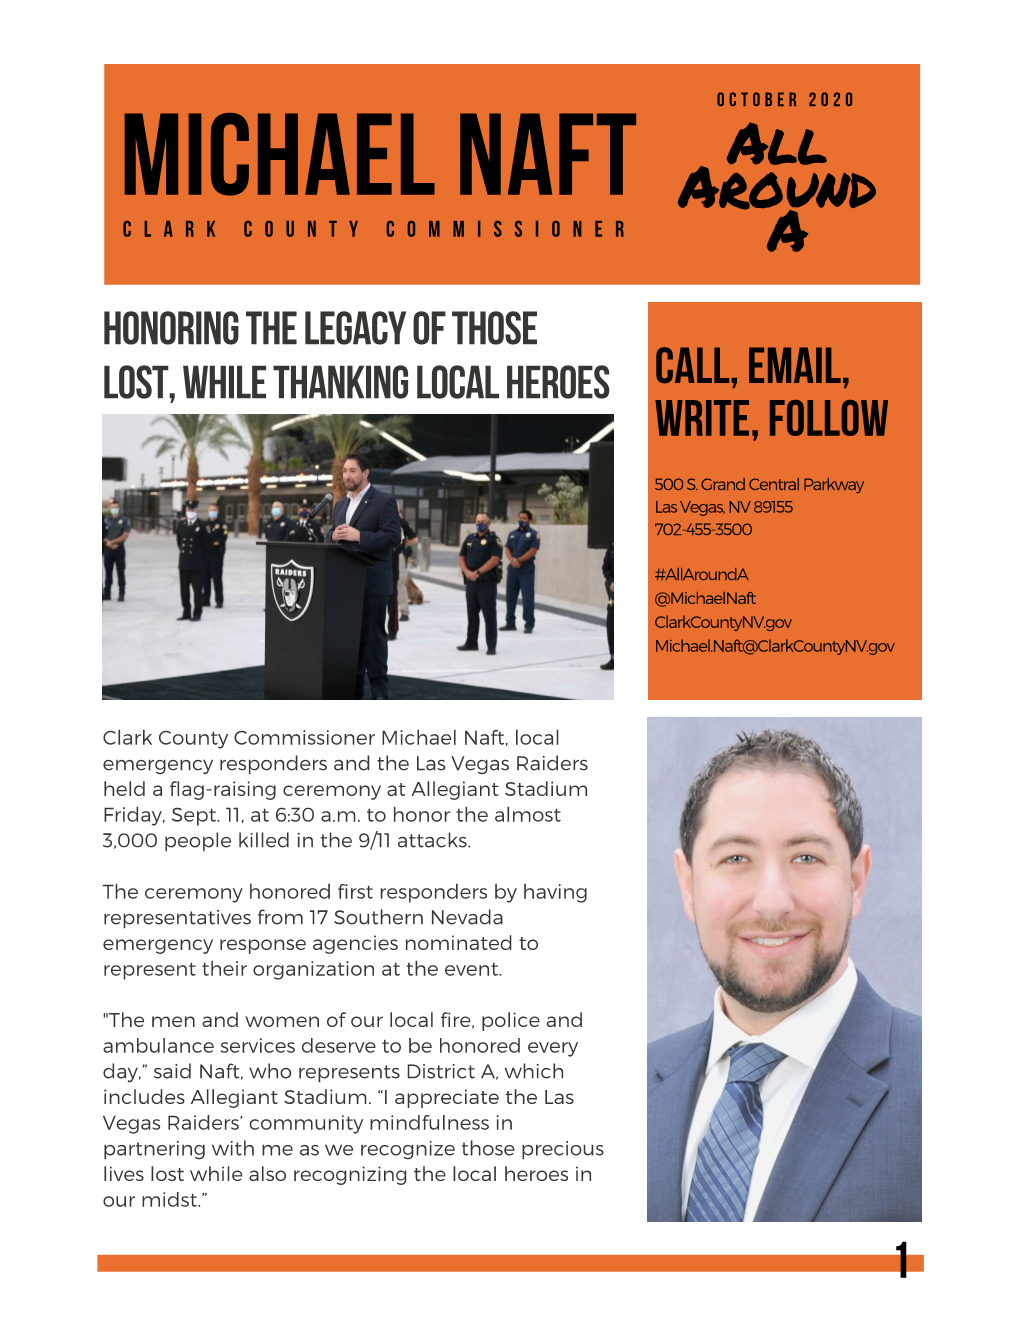 MICHAEL NAFT All Around C L a R K C O U N T Y C O M M I S S I O N E R a HONORING the LEGACY of THOSE LOST, WHILE THANKING LOCAL HEROES CALL, EMAIL, WRITE, FOLLOW